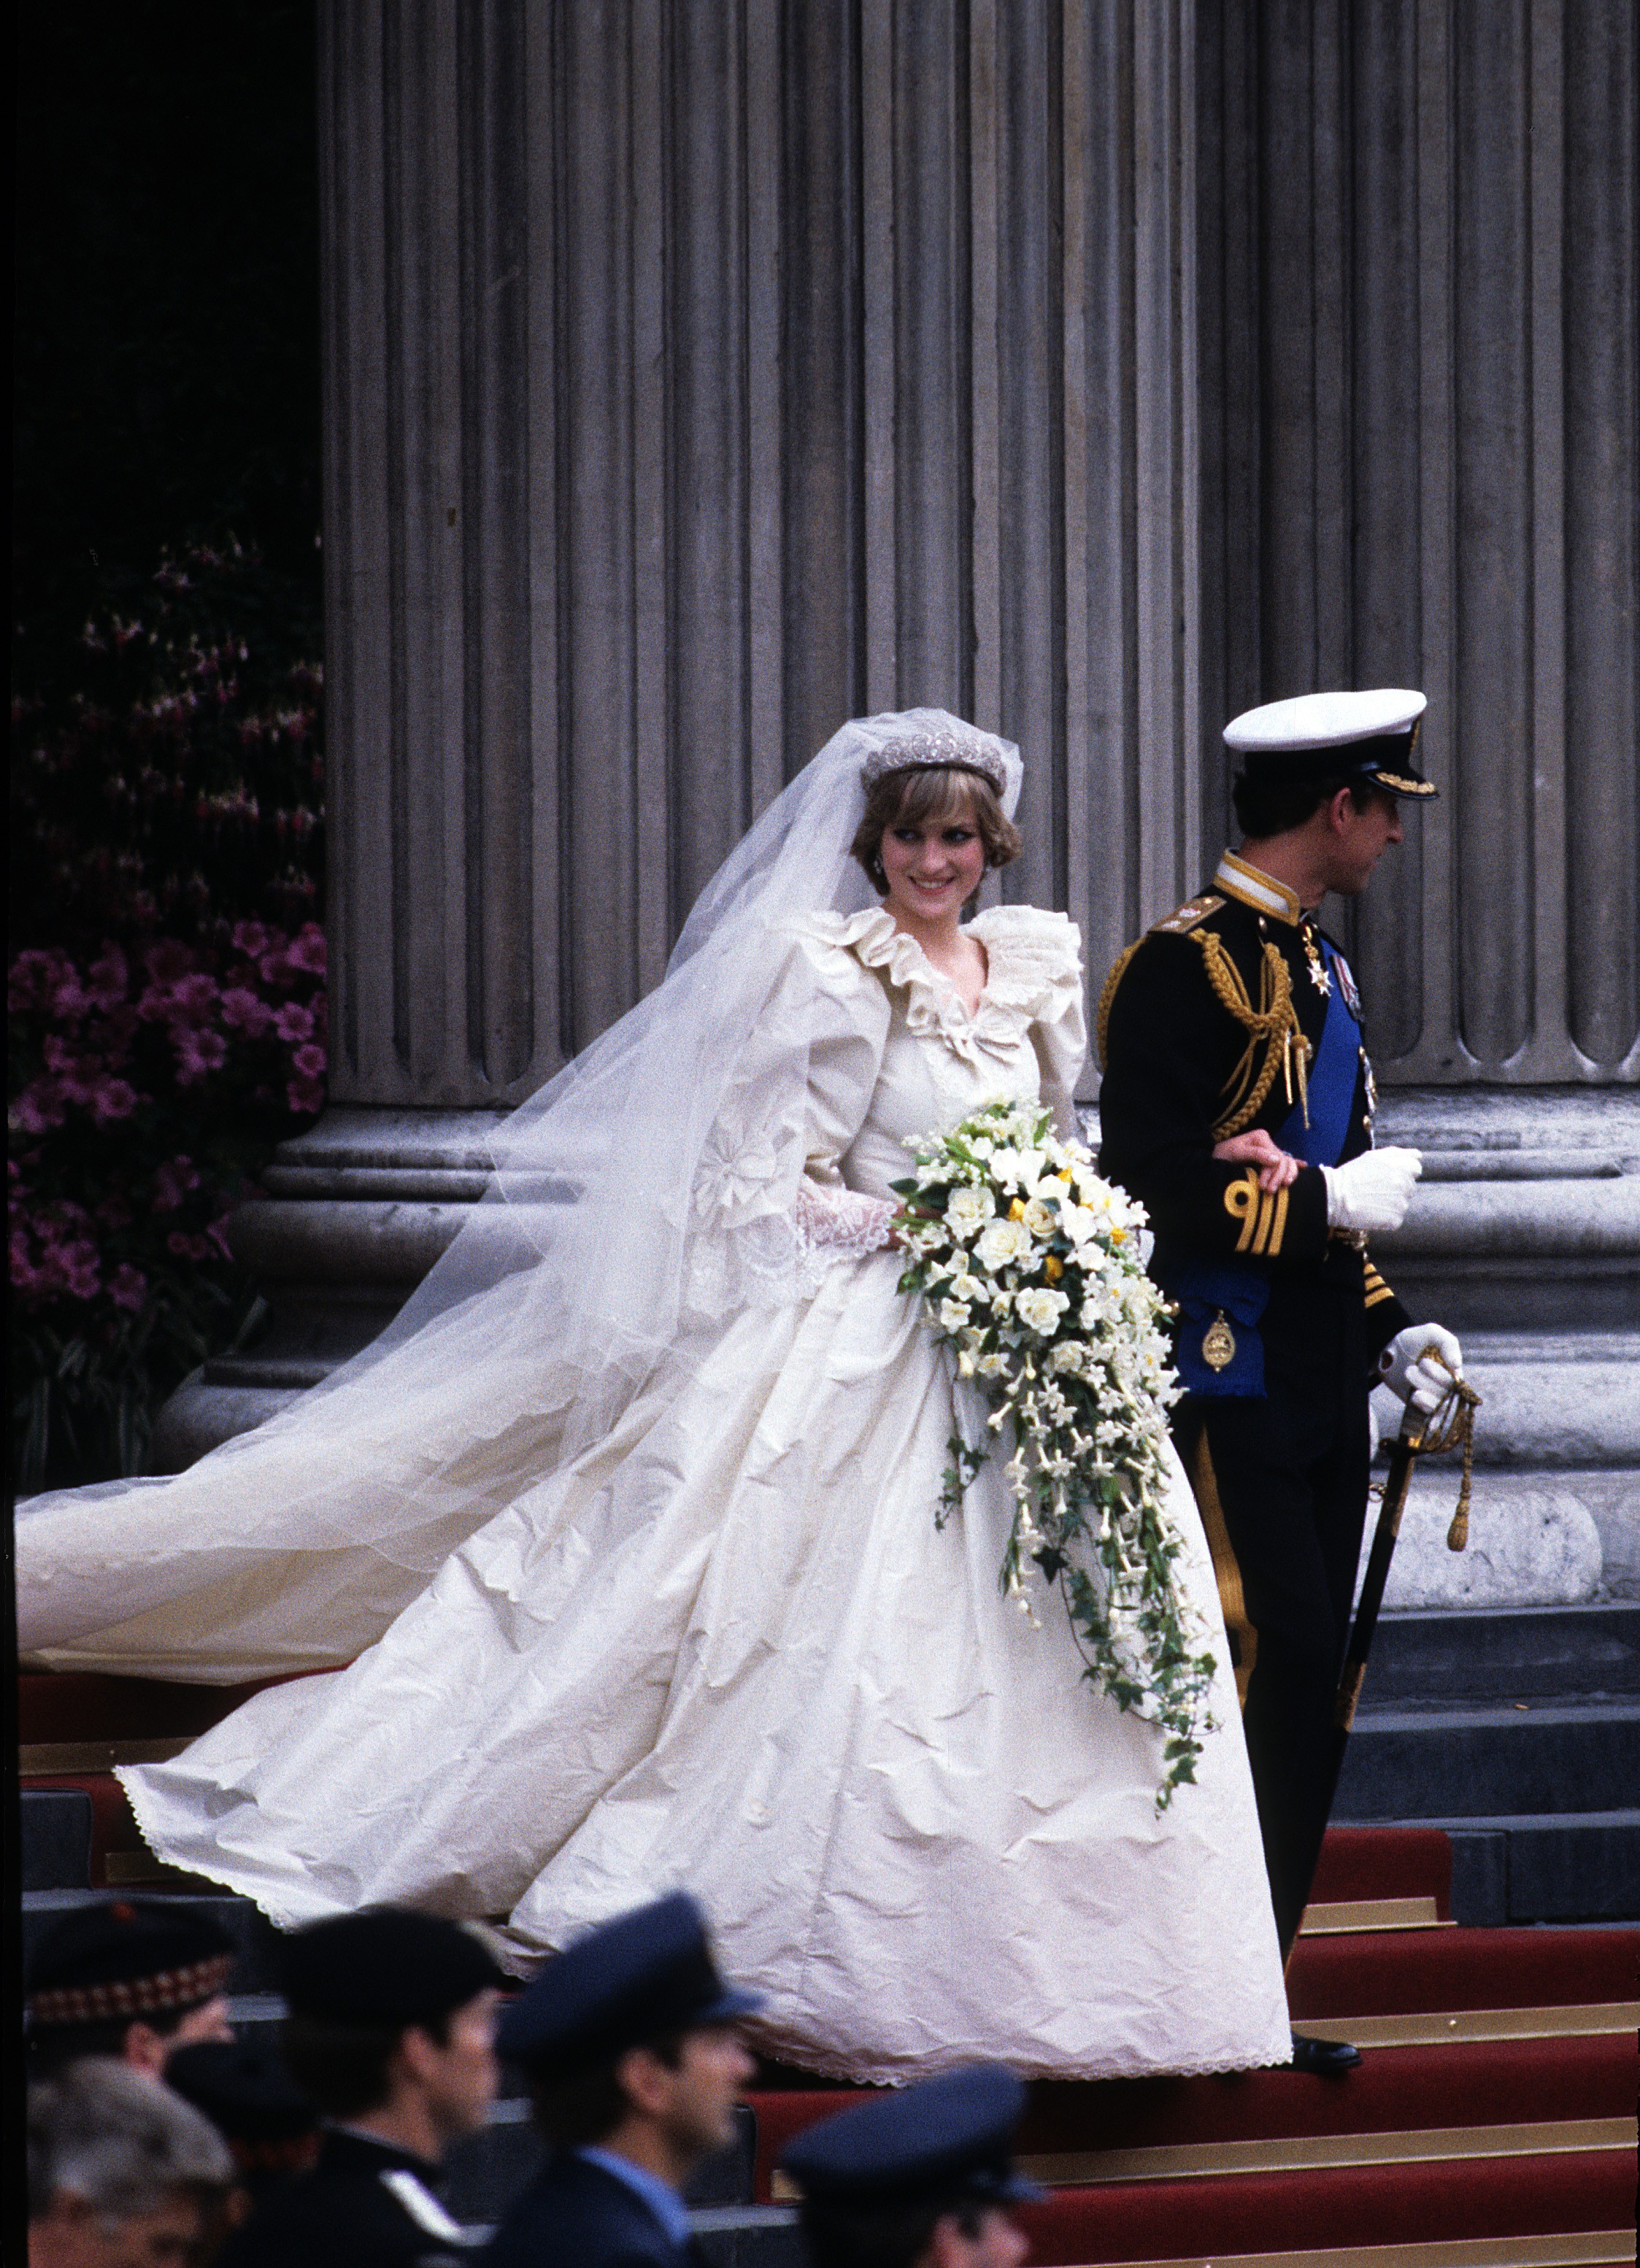 LONDON, ENGLAND - JULY 29: Prince Charles, Prince of Wales and Diana, Princess of Wales, wearing a wedding dress designed by David and Elizabeth Emanuel and the Spencer family Tiara, leave St. Paul's Cathedral following their wedding on July 29, 1981 in L (Foto: Getty Images)